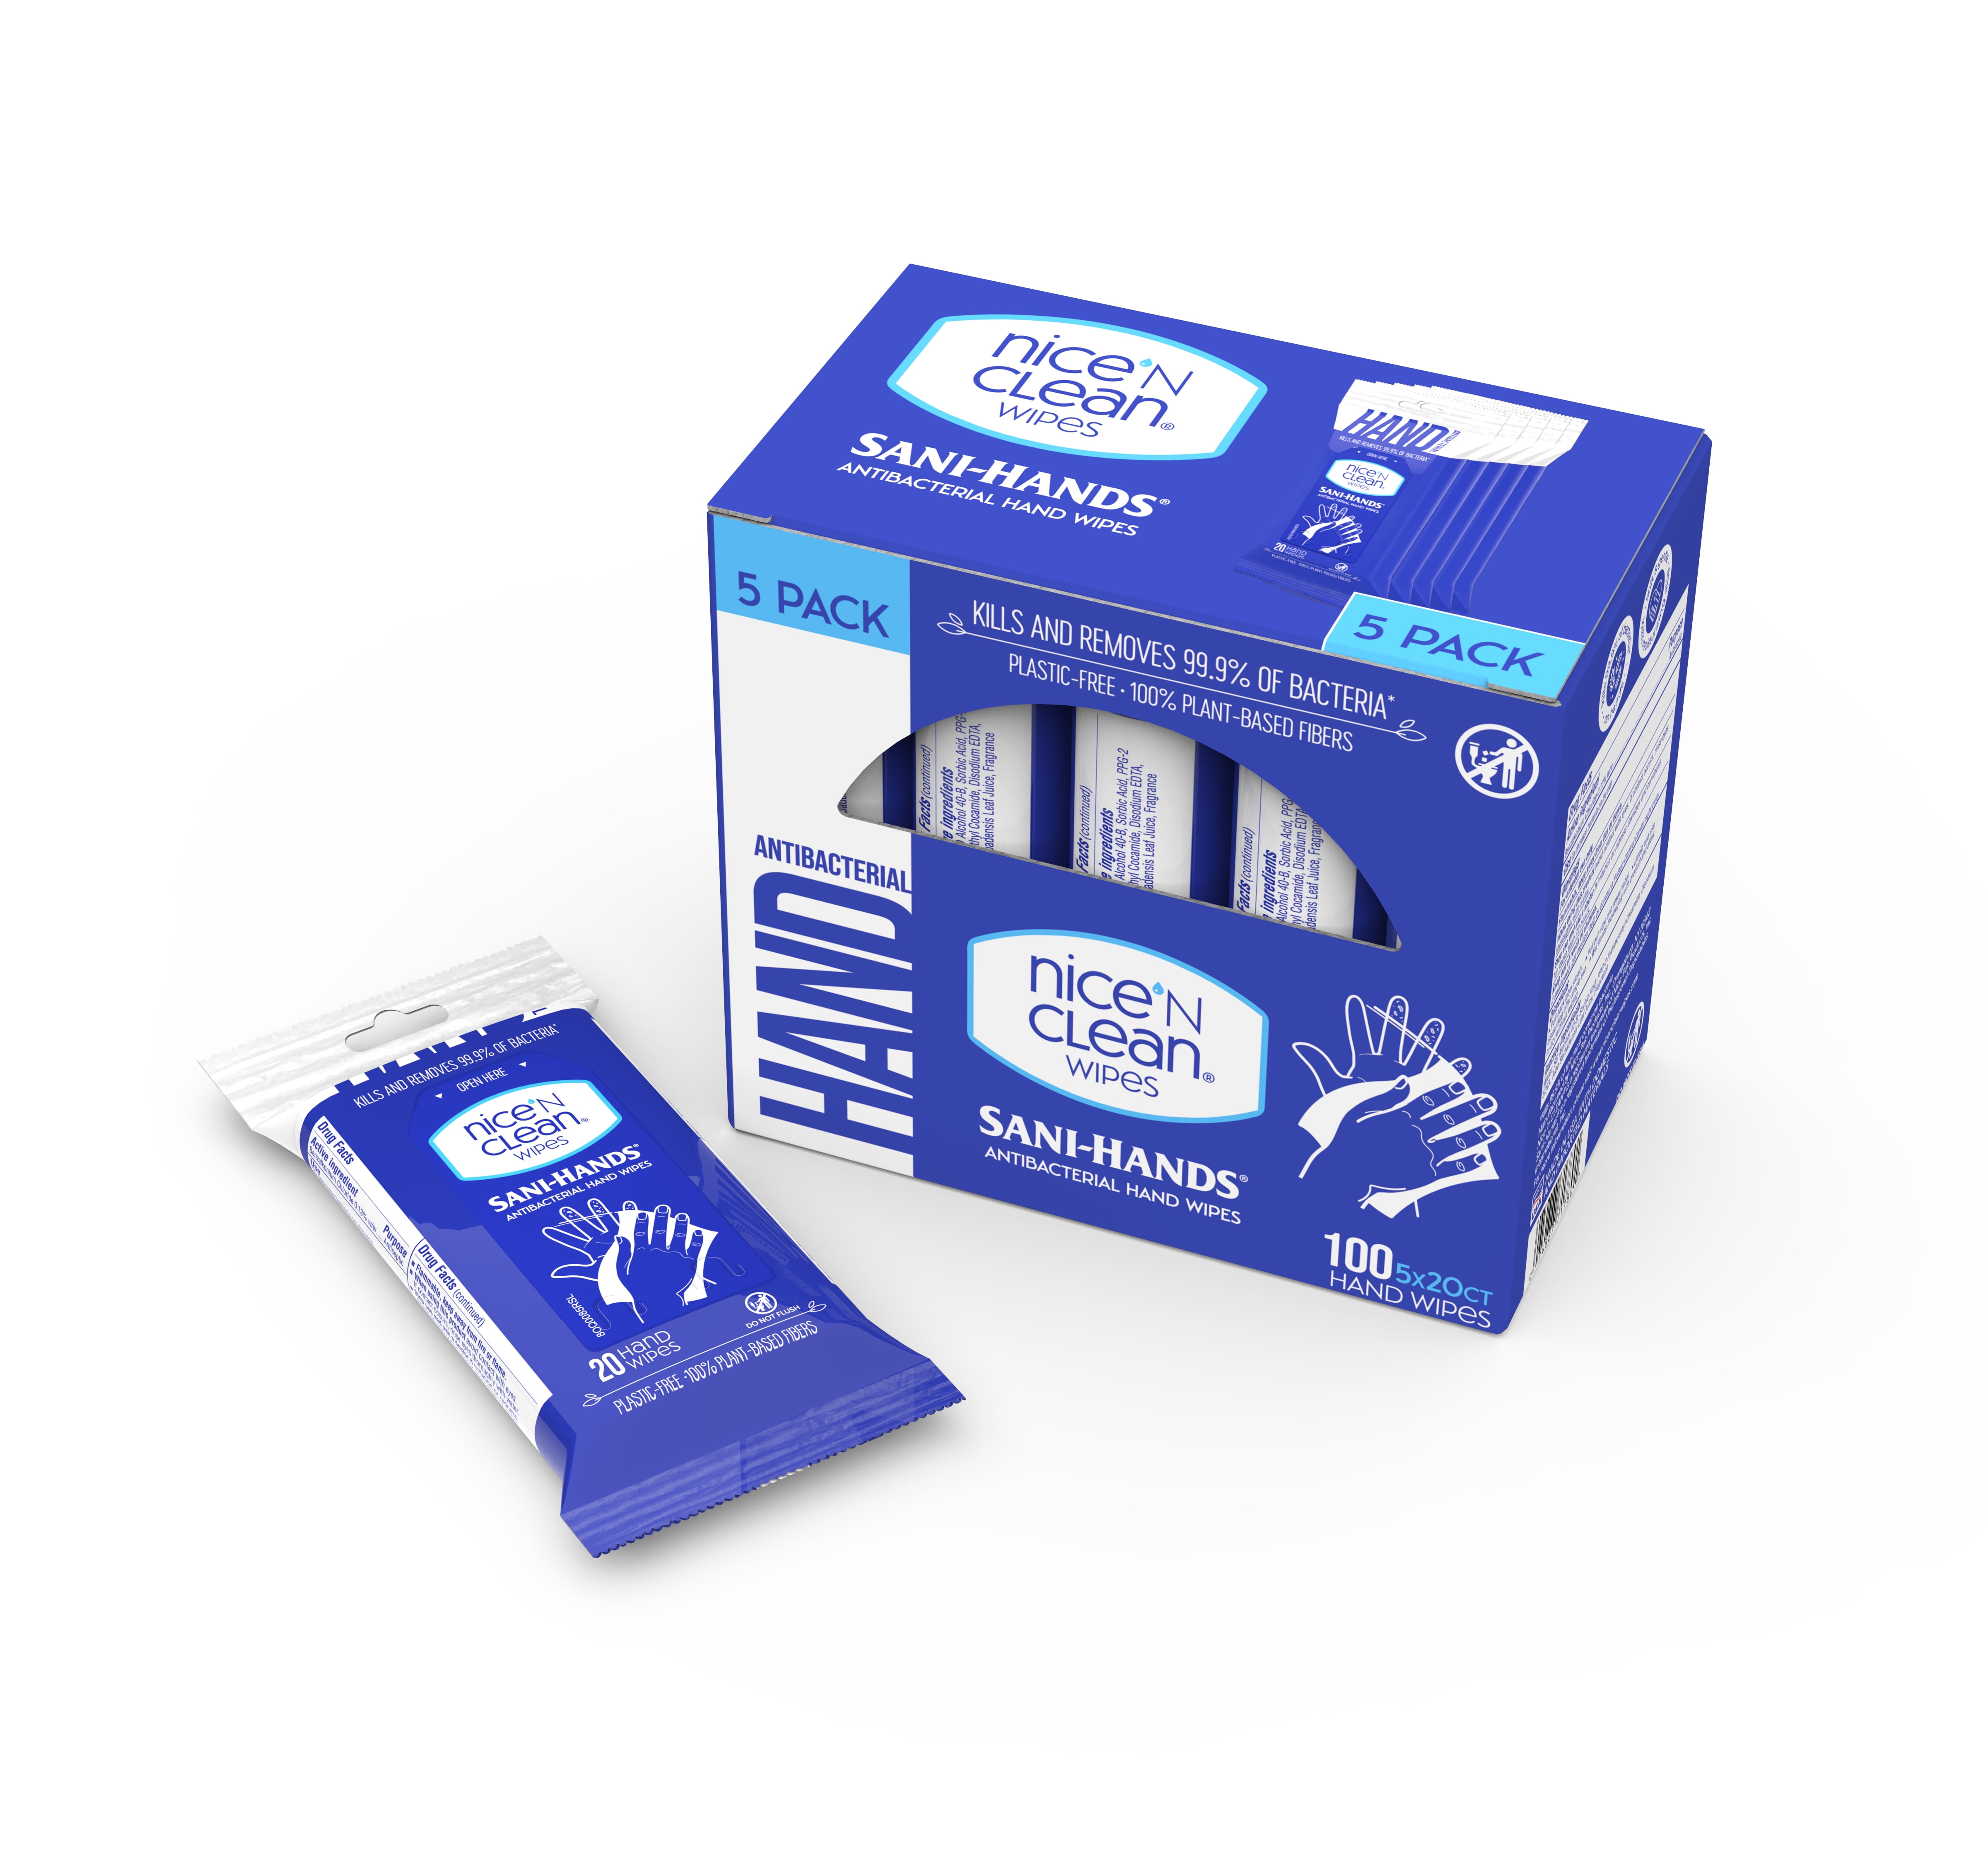 CleanVital Hand & Surface Anti Bacterial Wipes –